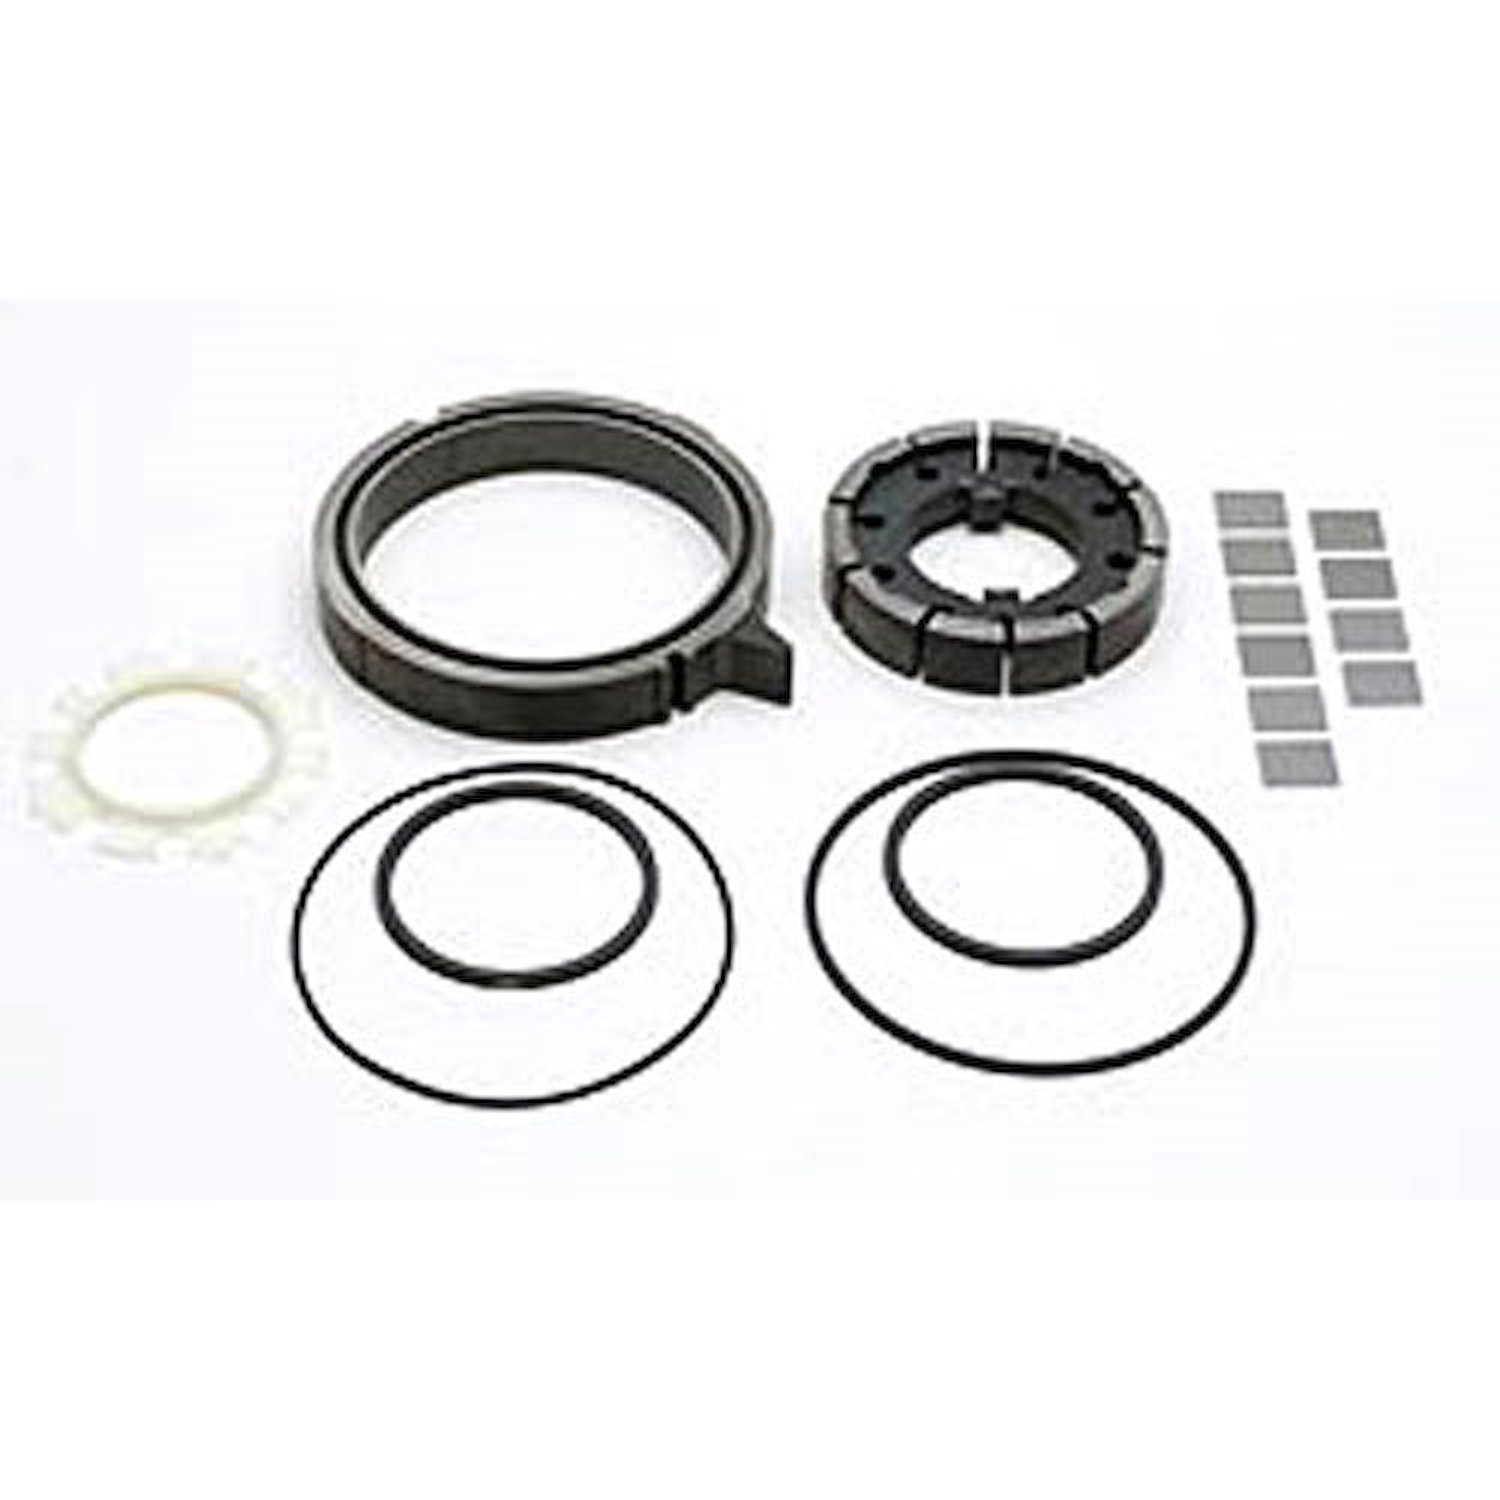 High Output 10-Vane Rotor Kit Fits 200R4, 700R4, 4L60E Front Pumps